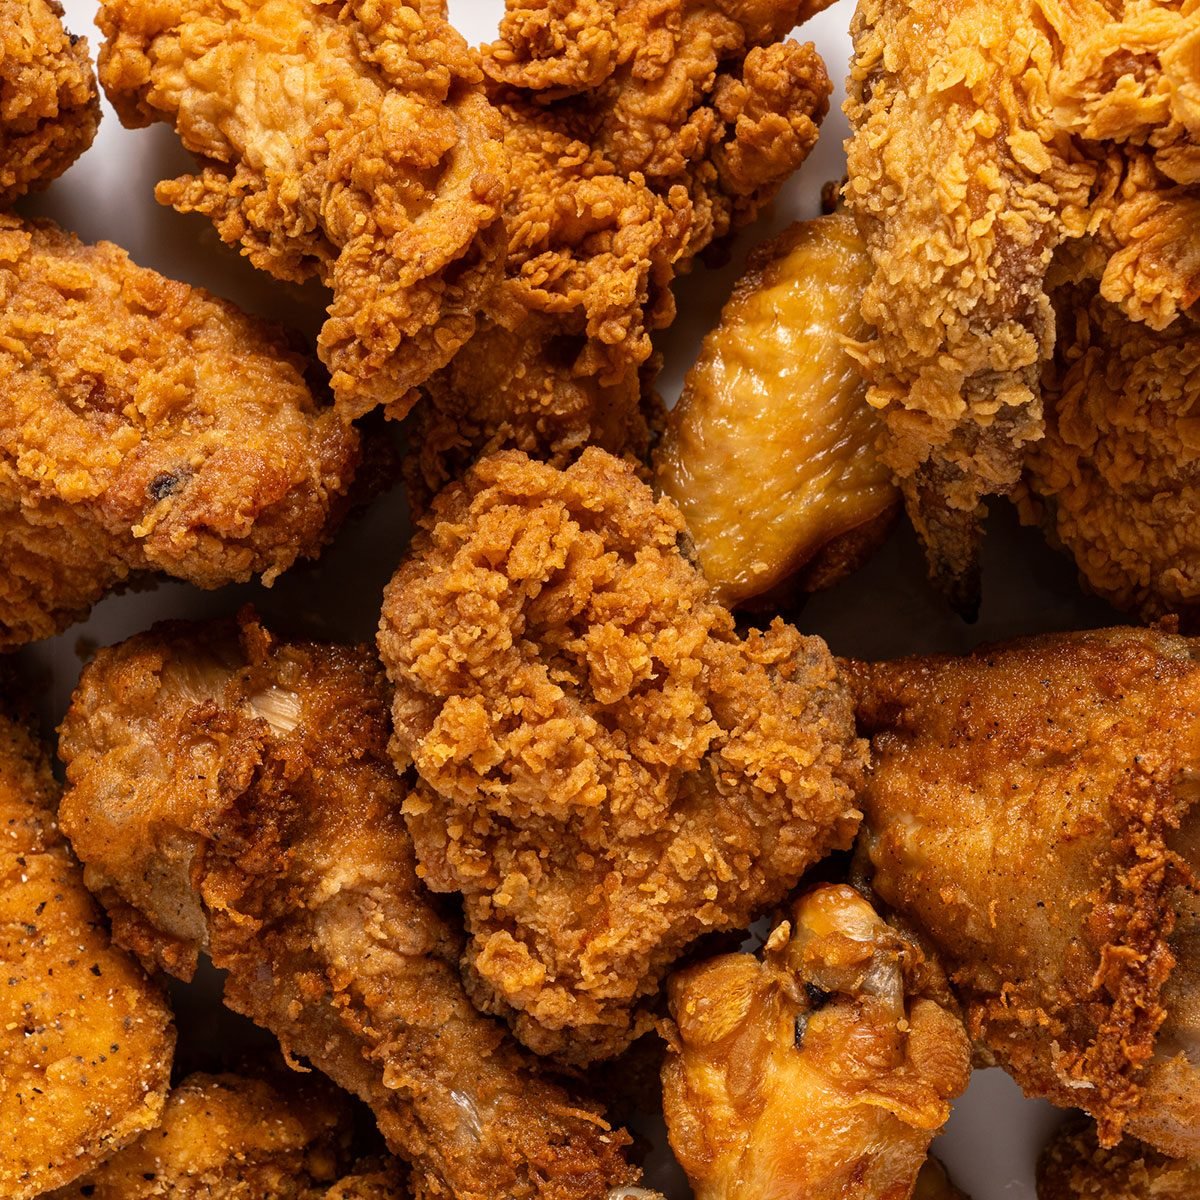 Taste Test: I Tried Popeyes' Fried Chicken for the First Time